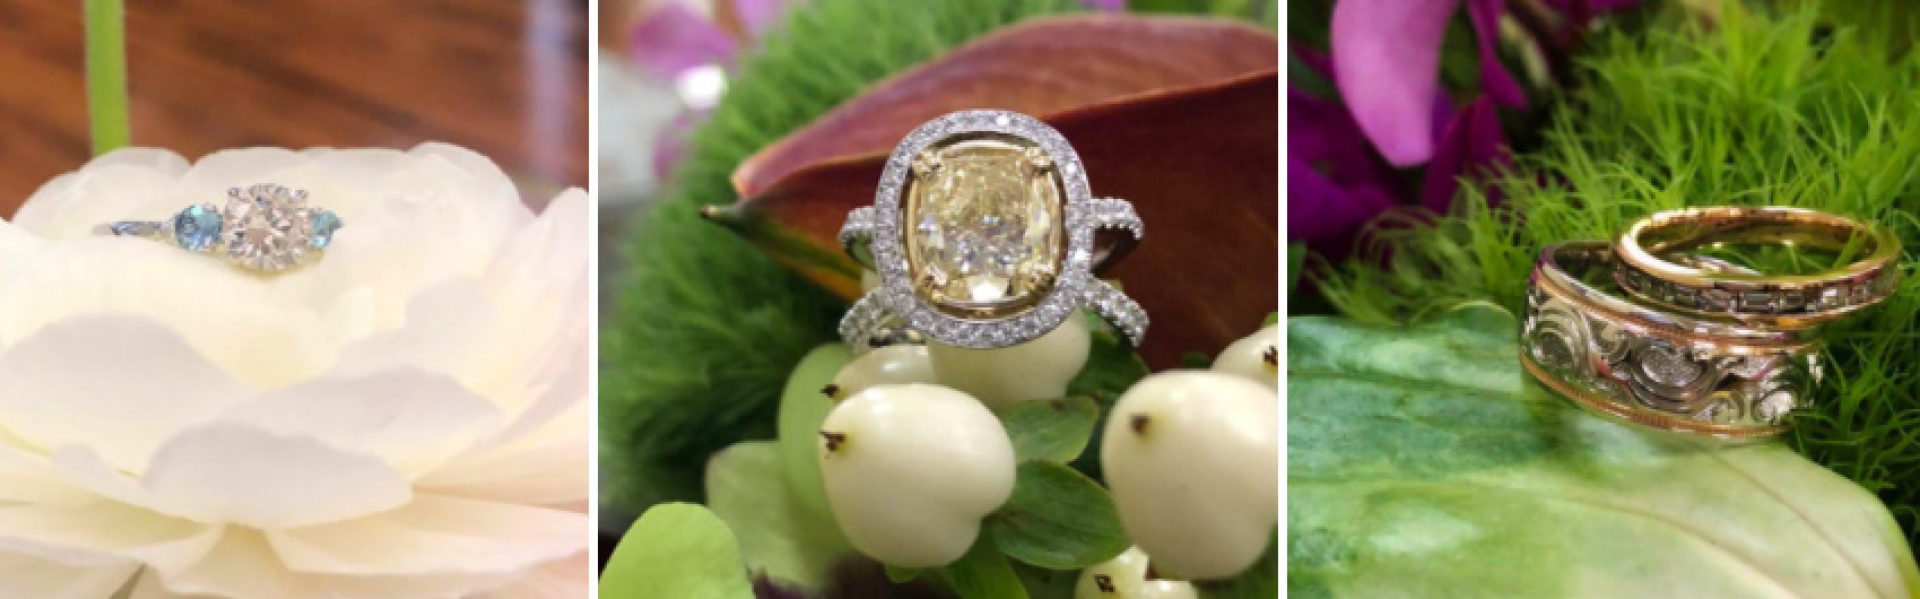 How to Design a Custom Engagement Ring | E.R. Sawyer Jewelers